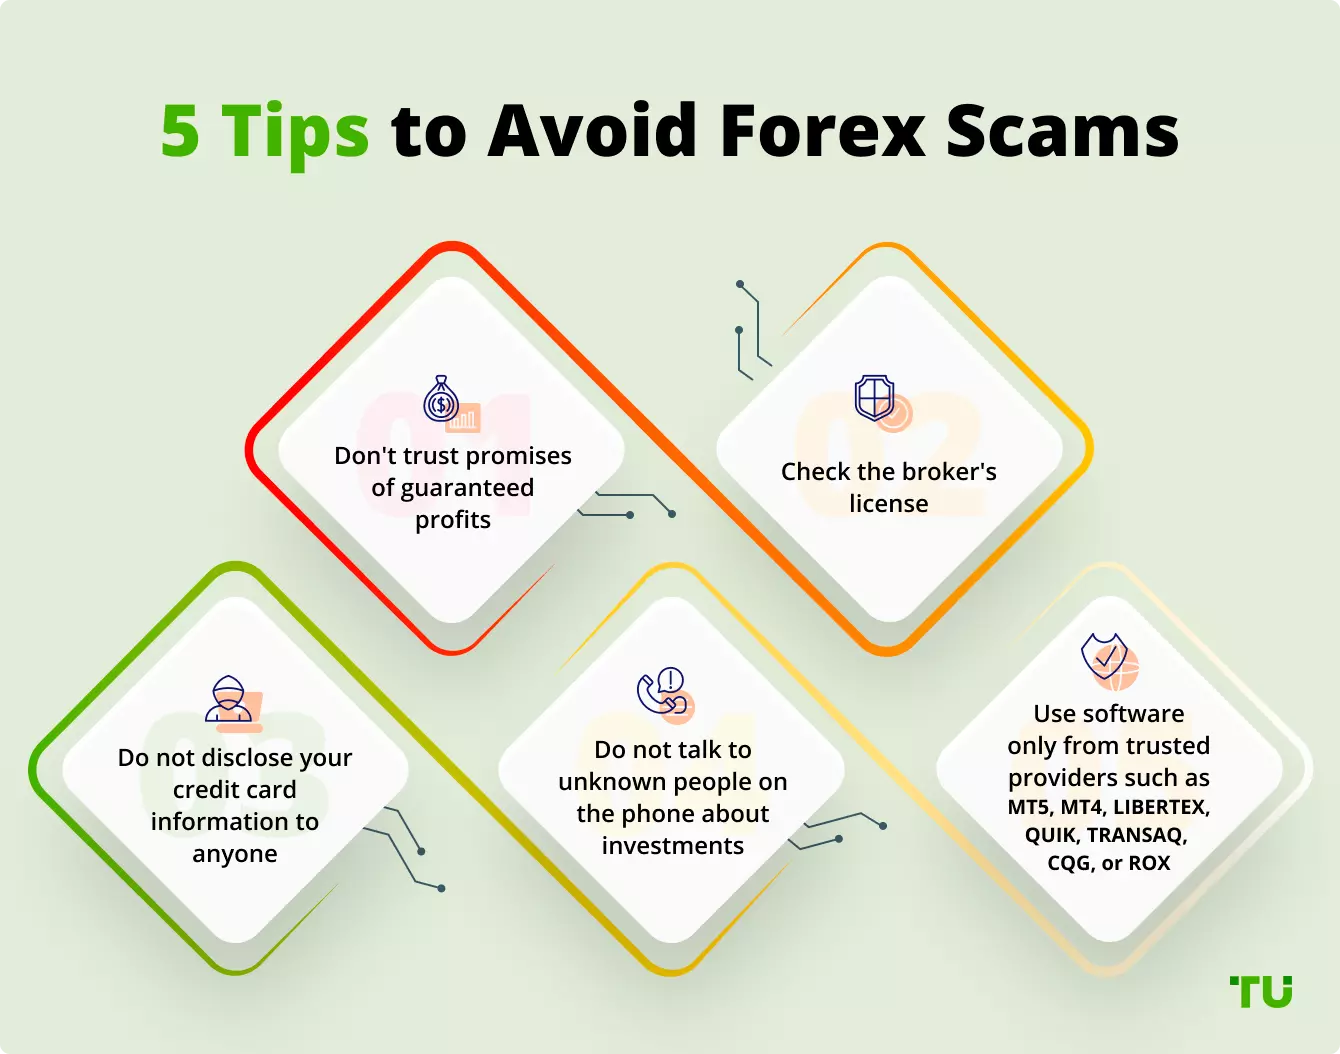 Forex trading scams - List of scam brokers 2022